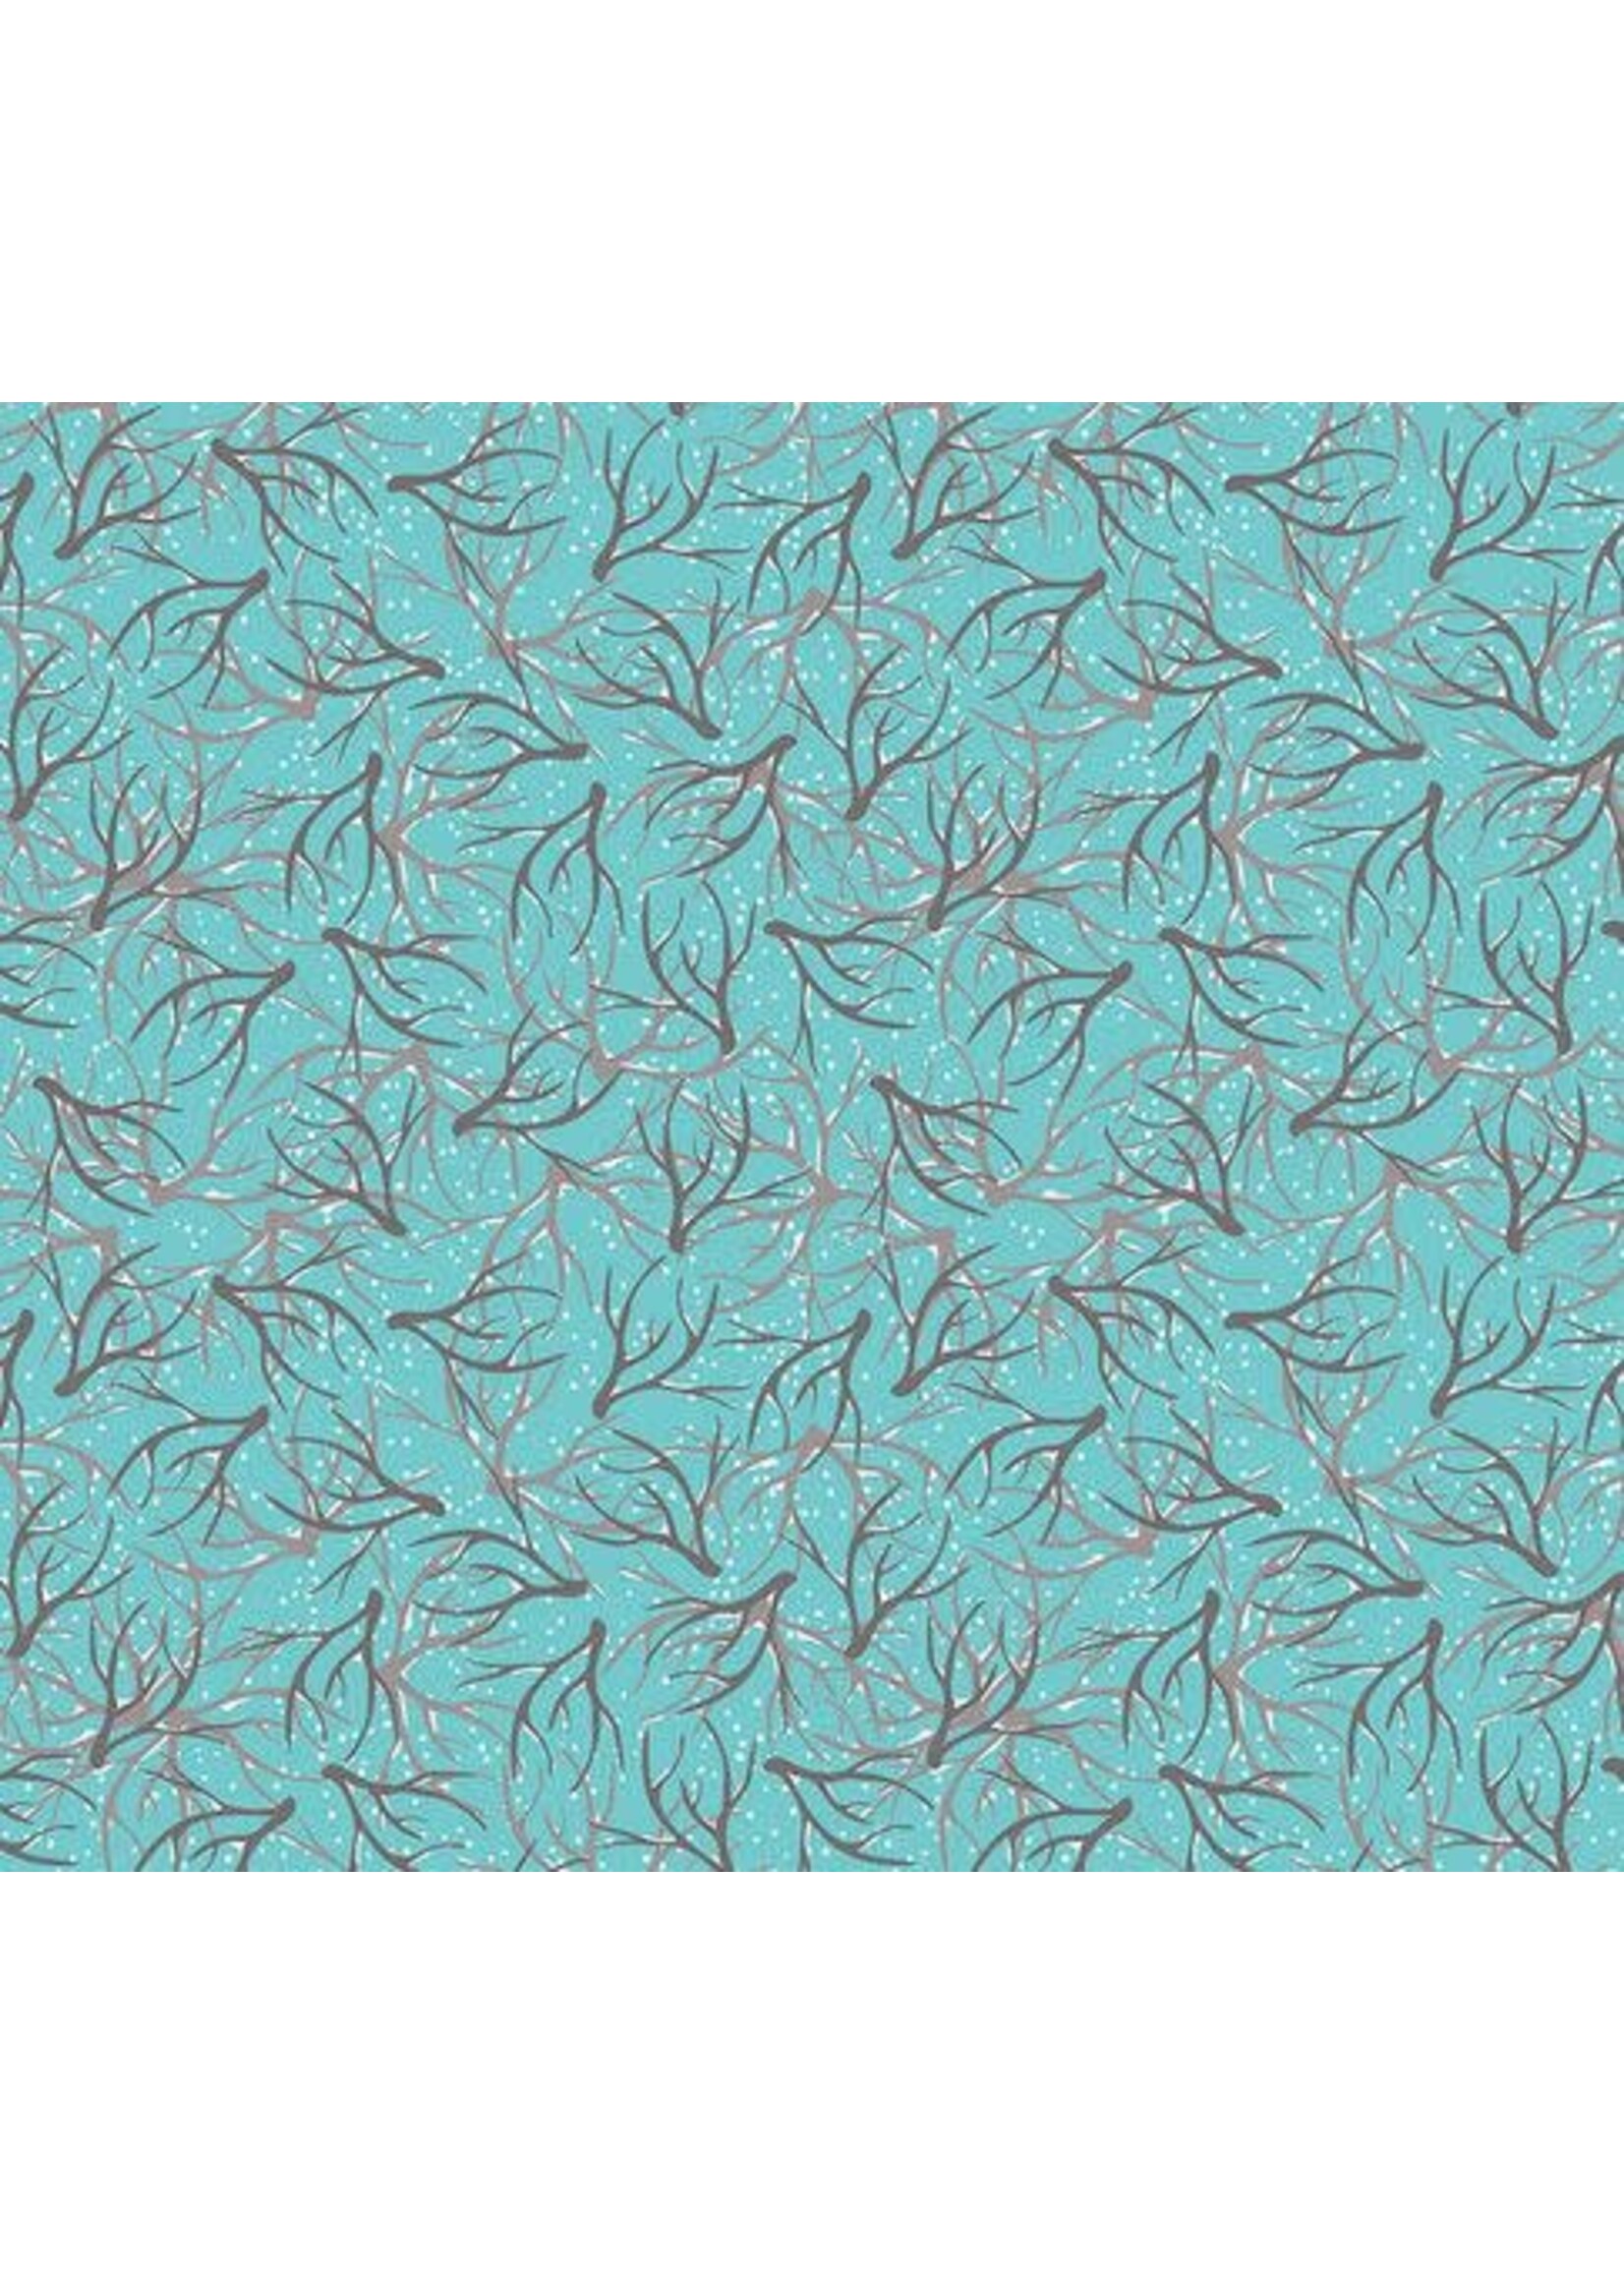 Tula Pink Antlers- Blue - Per 1/2 mtr